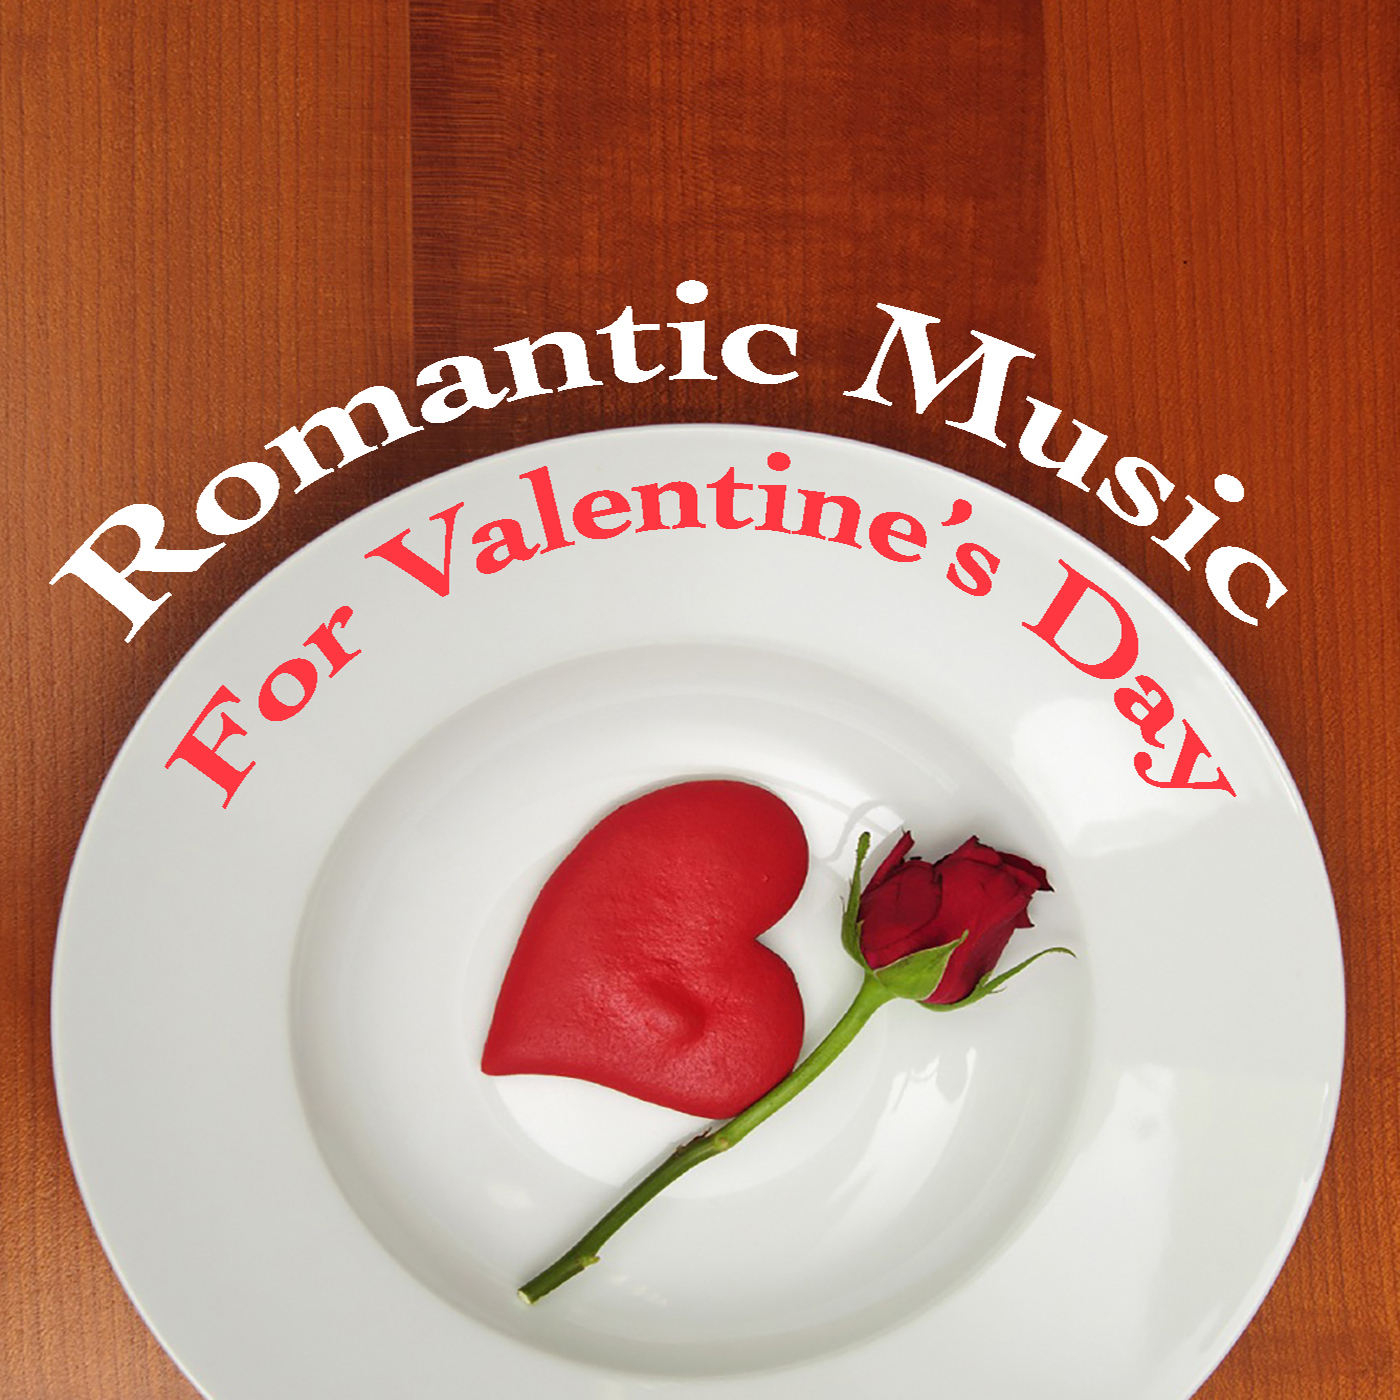 Romantic Music For Valentine's Day